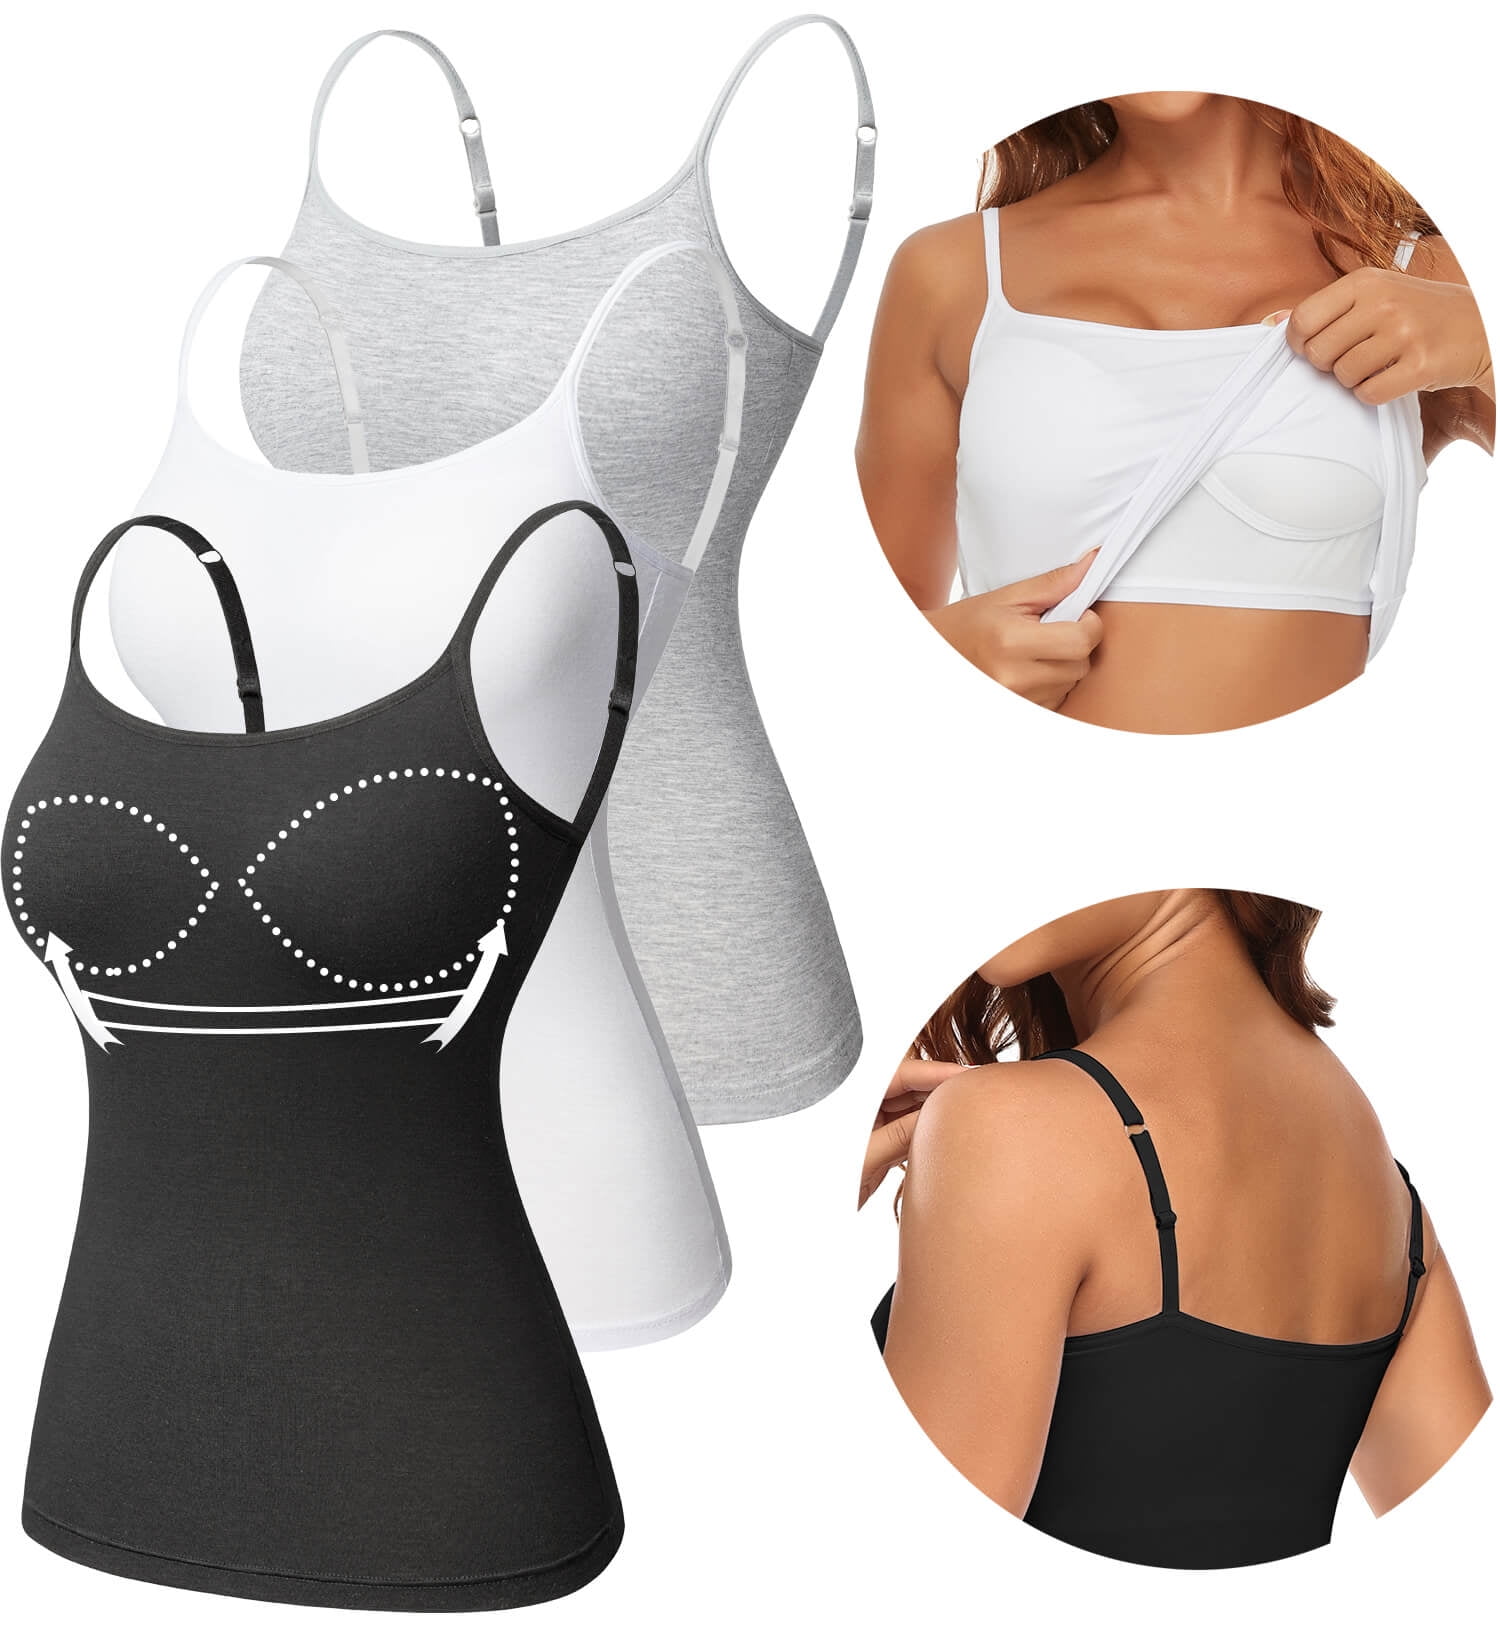 20 Best Tank Tops With Built-In Bras For Total Comfort